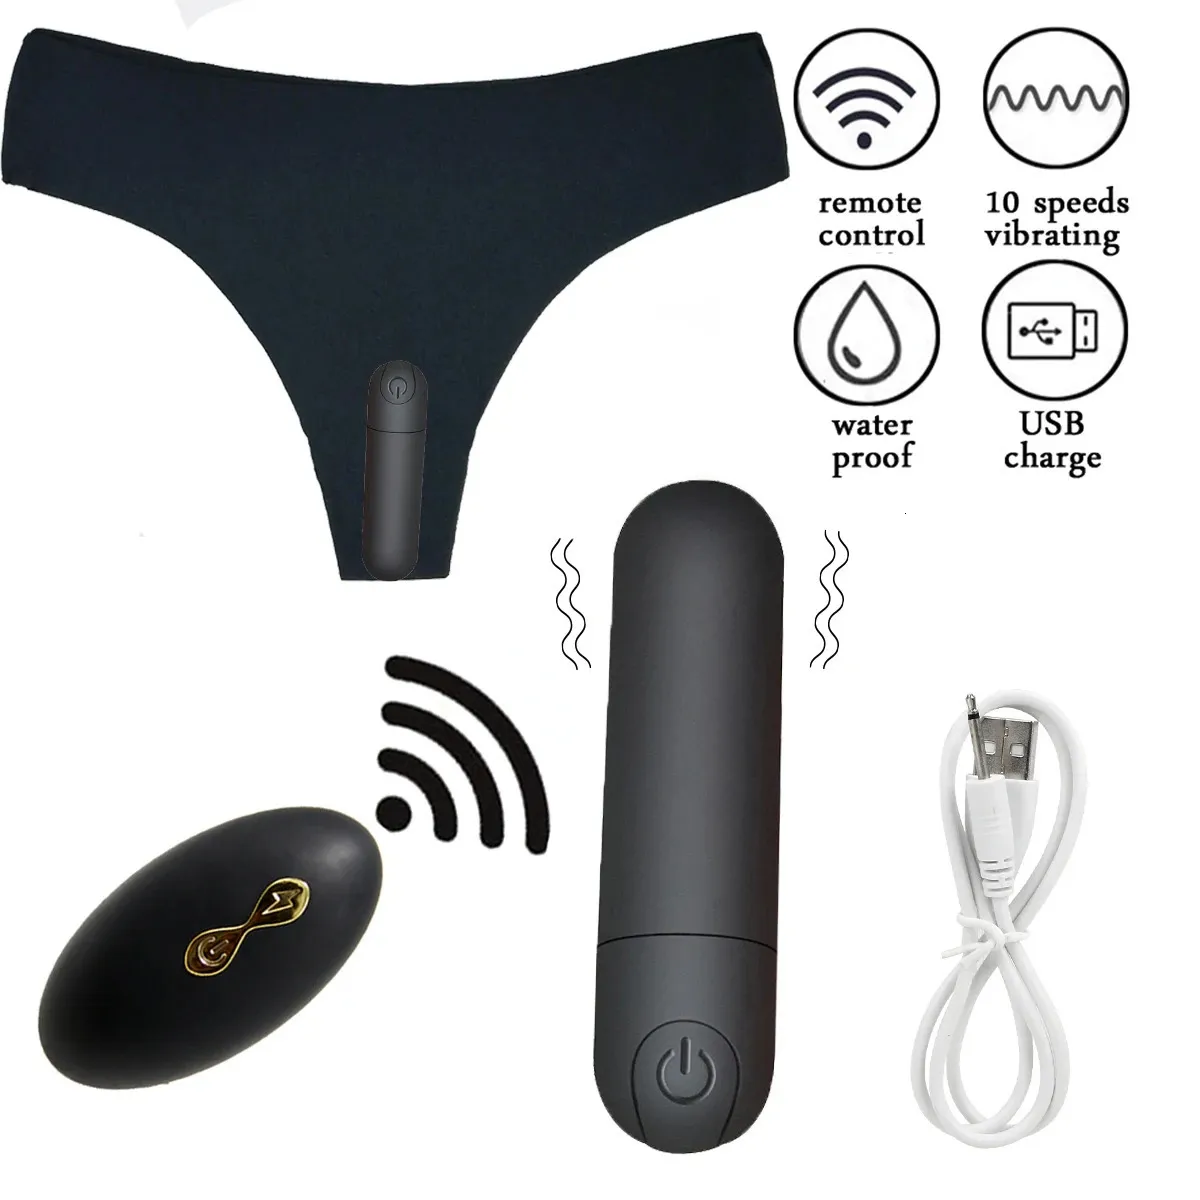 Vibrators Vibrating Panties 10 Function Wireless Remote Control Rechargeable Bullet Vibrator Strap on Underwear Vibrator for Women Sex Toy 231216